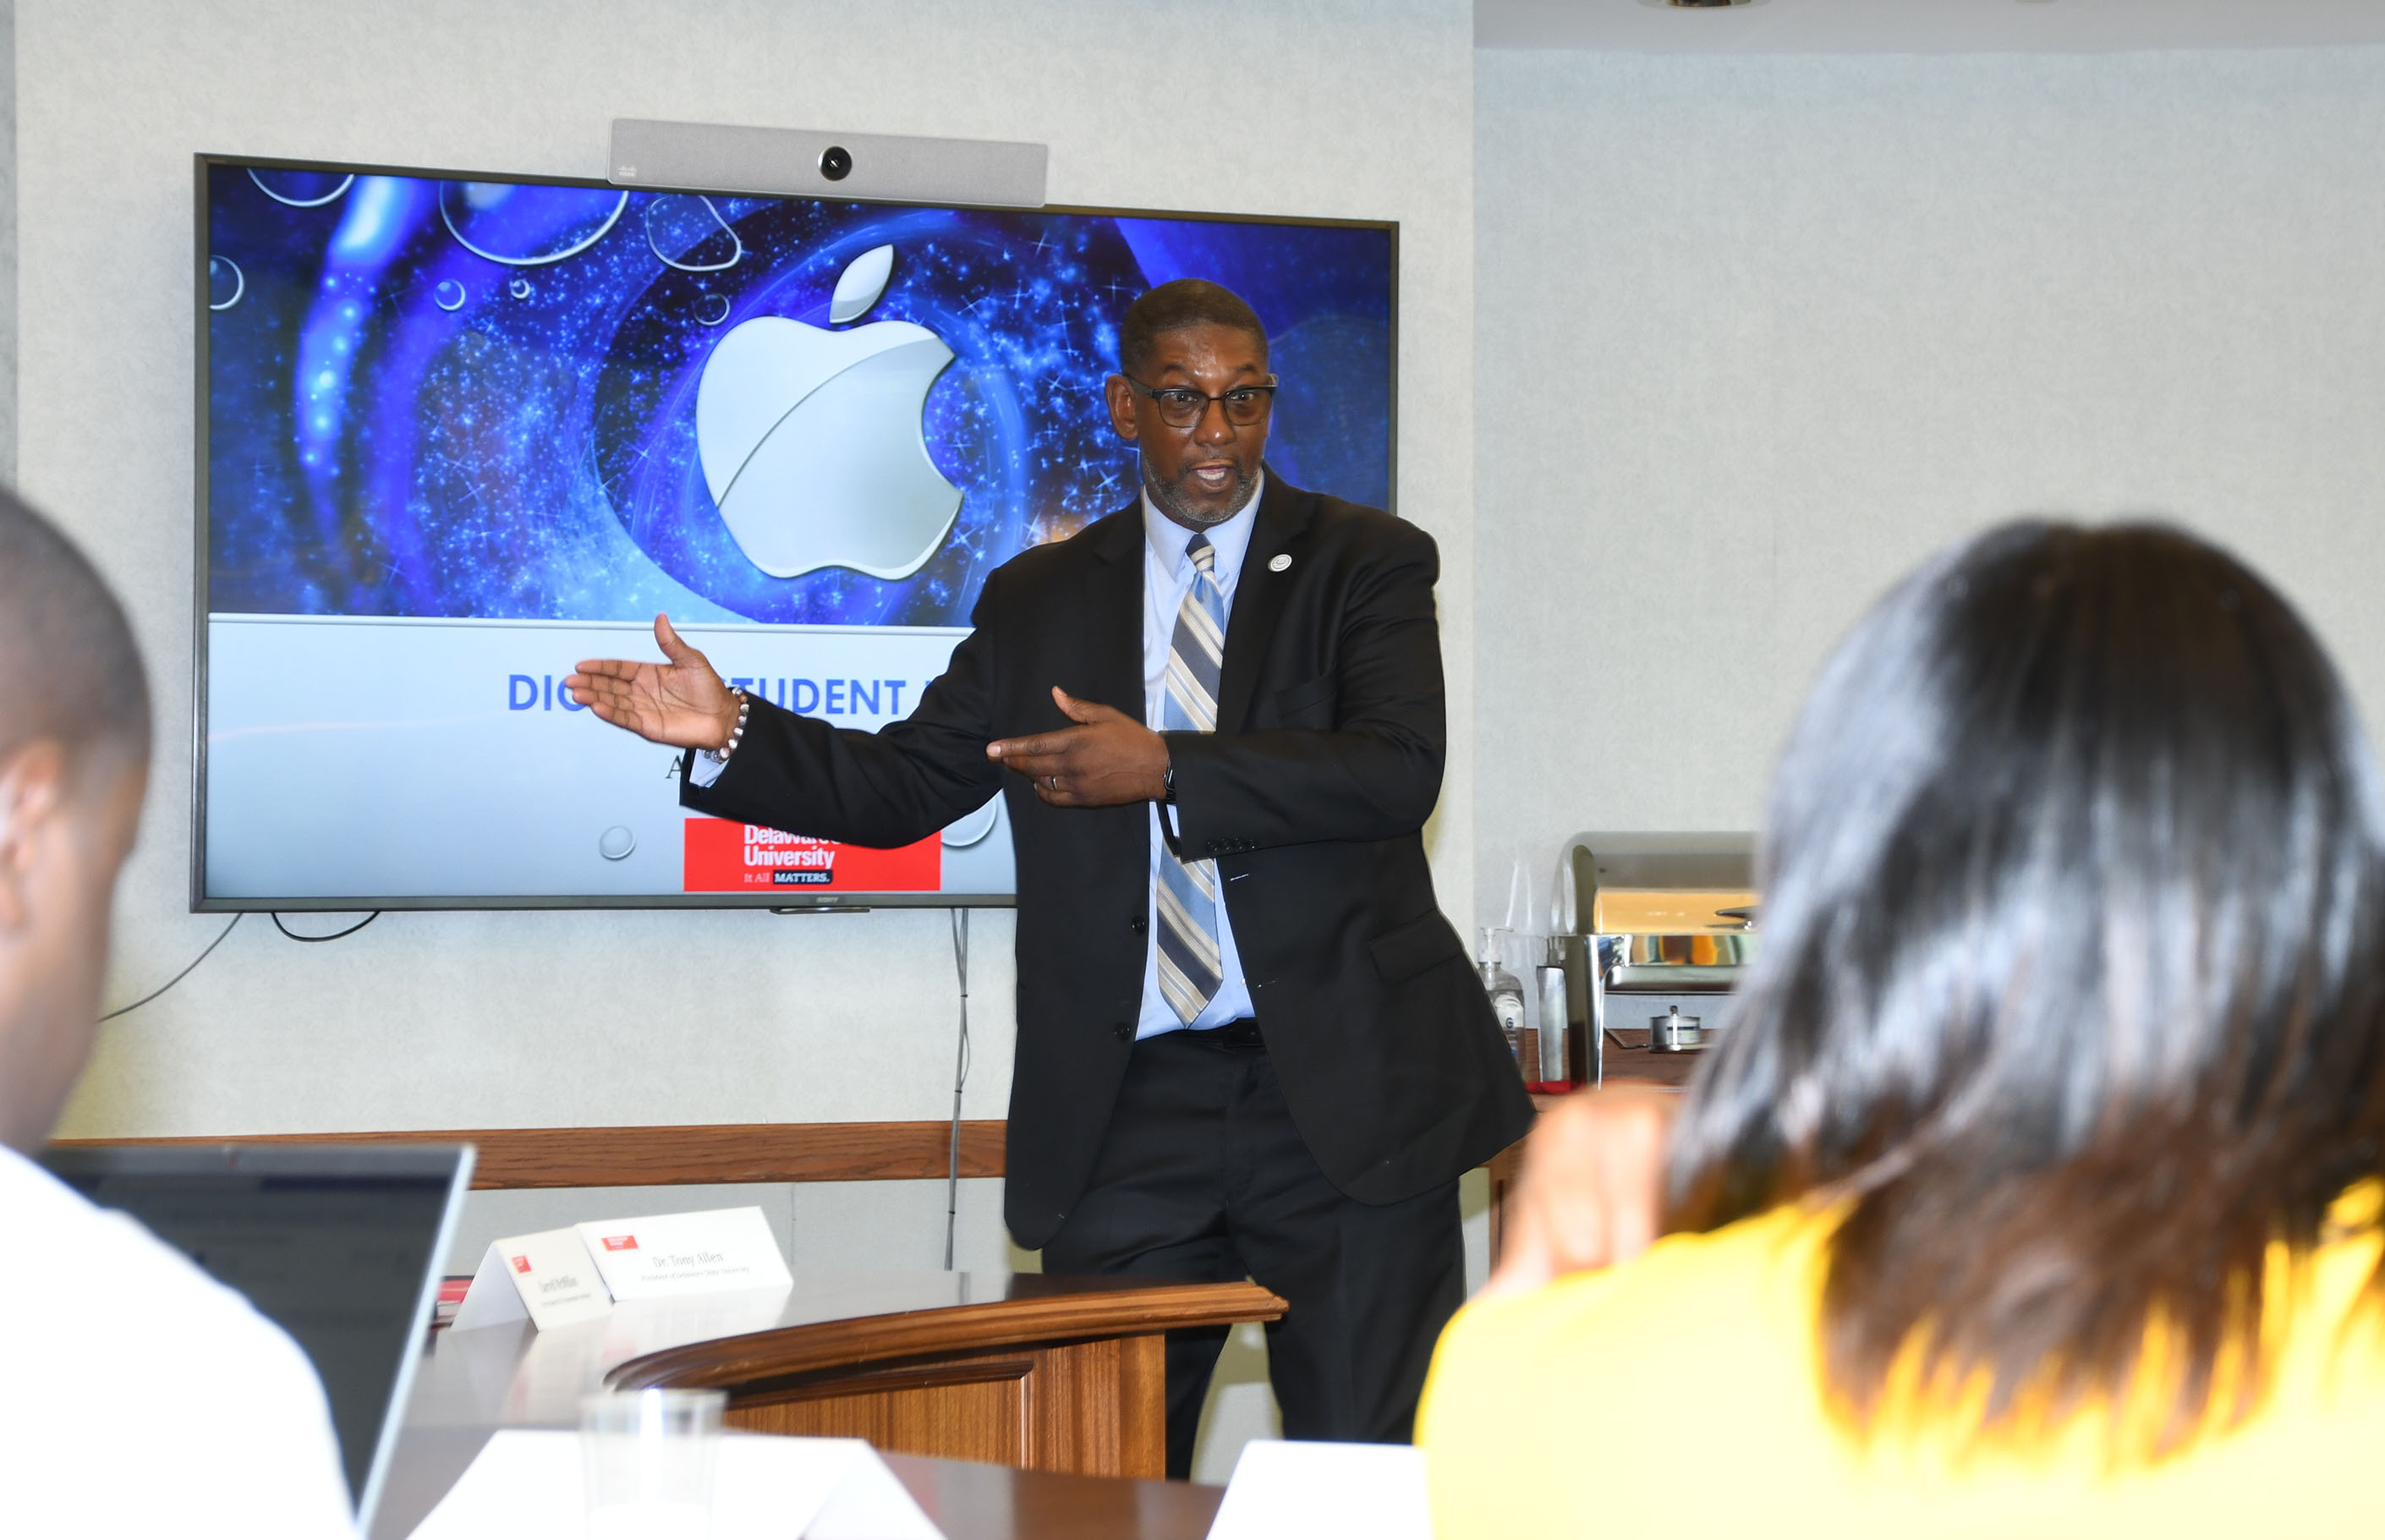 Darrell McMillon, University CIO, shares information about the Apple Initiative with visitors from Fort Valley St. University.